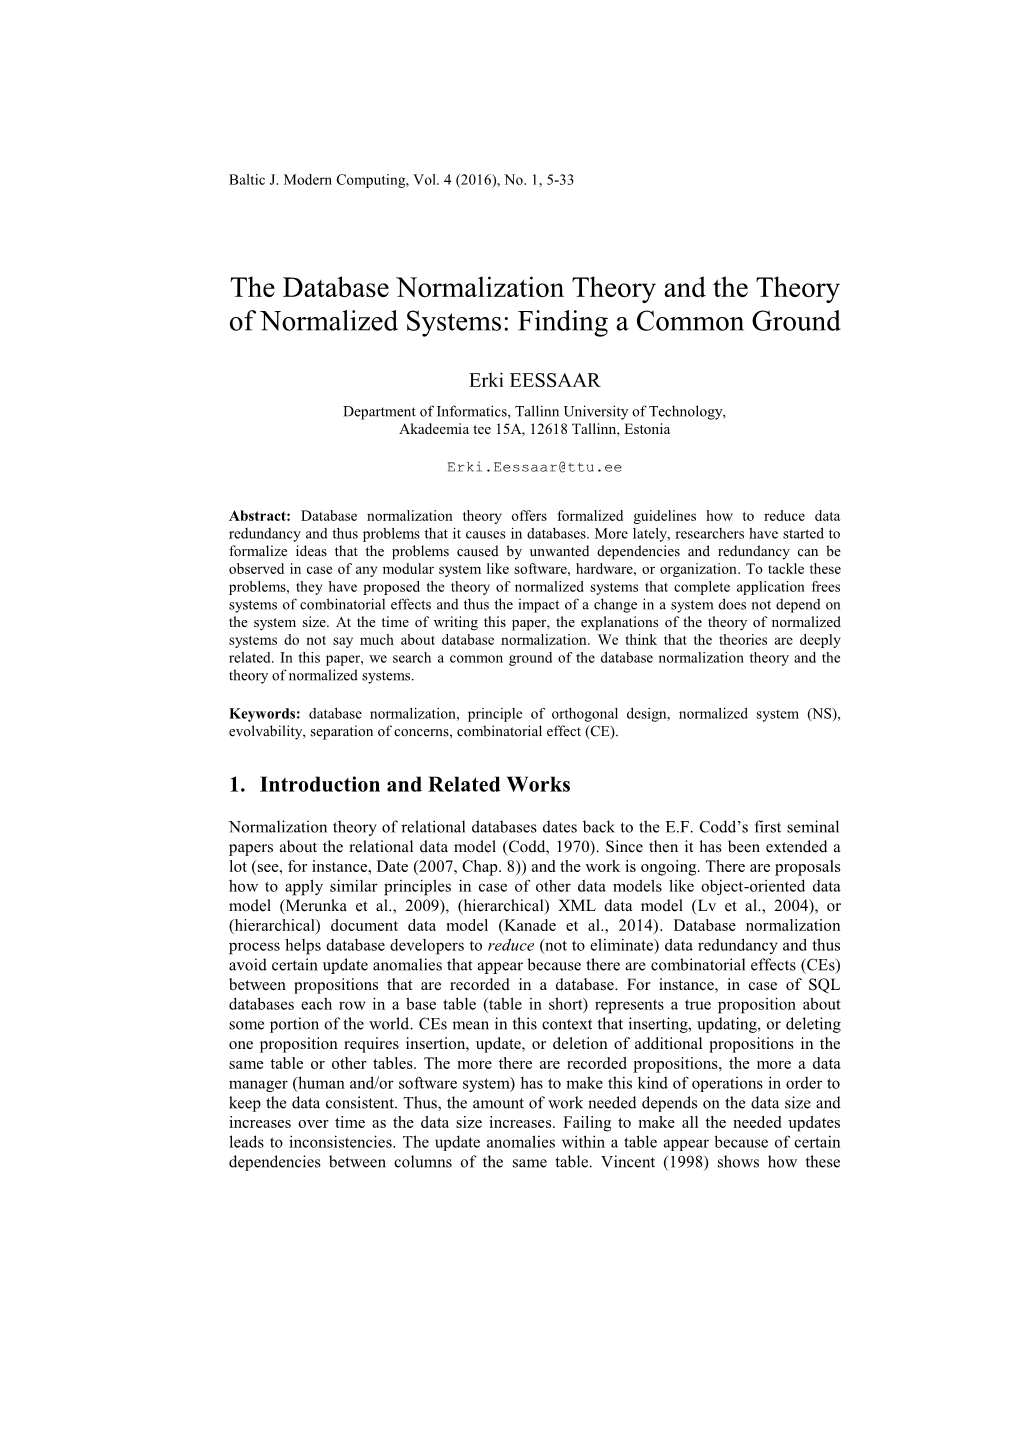 The Database Normalizaton Theory and the Theory of Normalized Systems